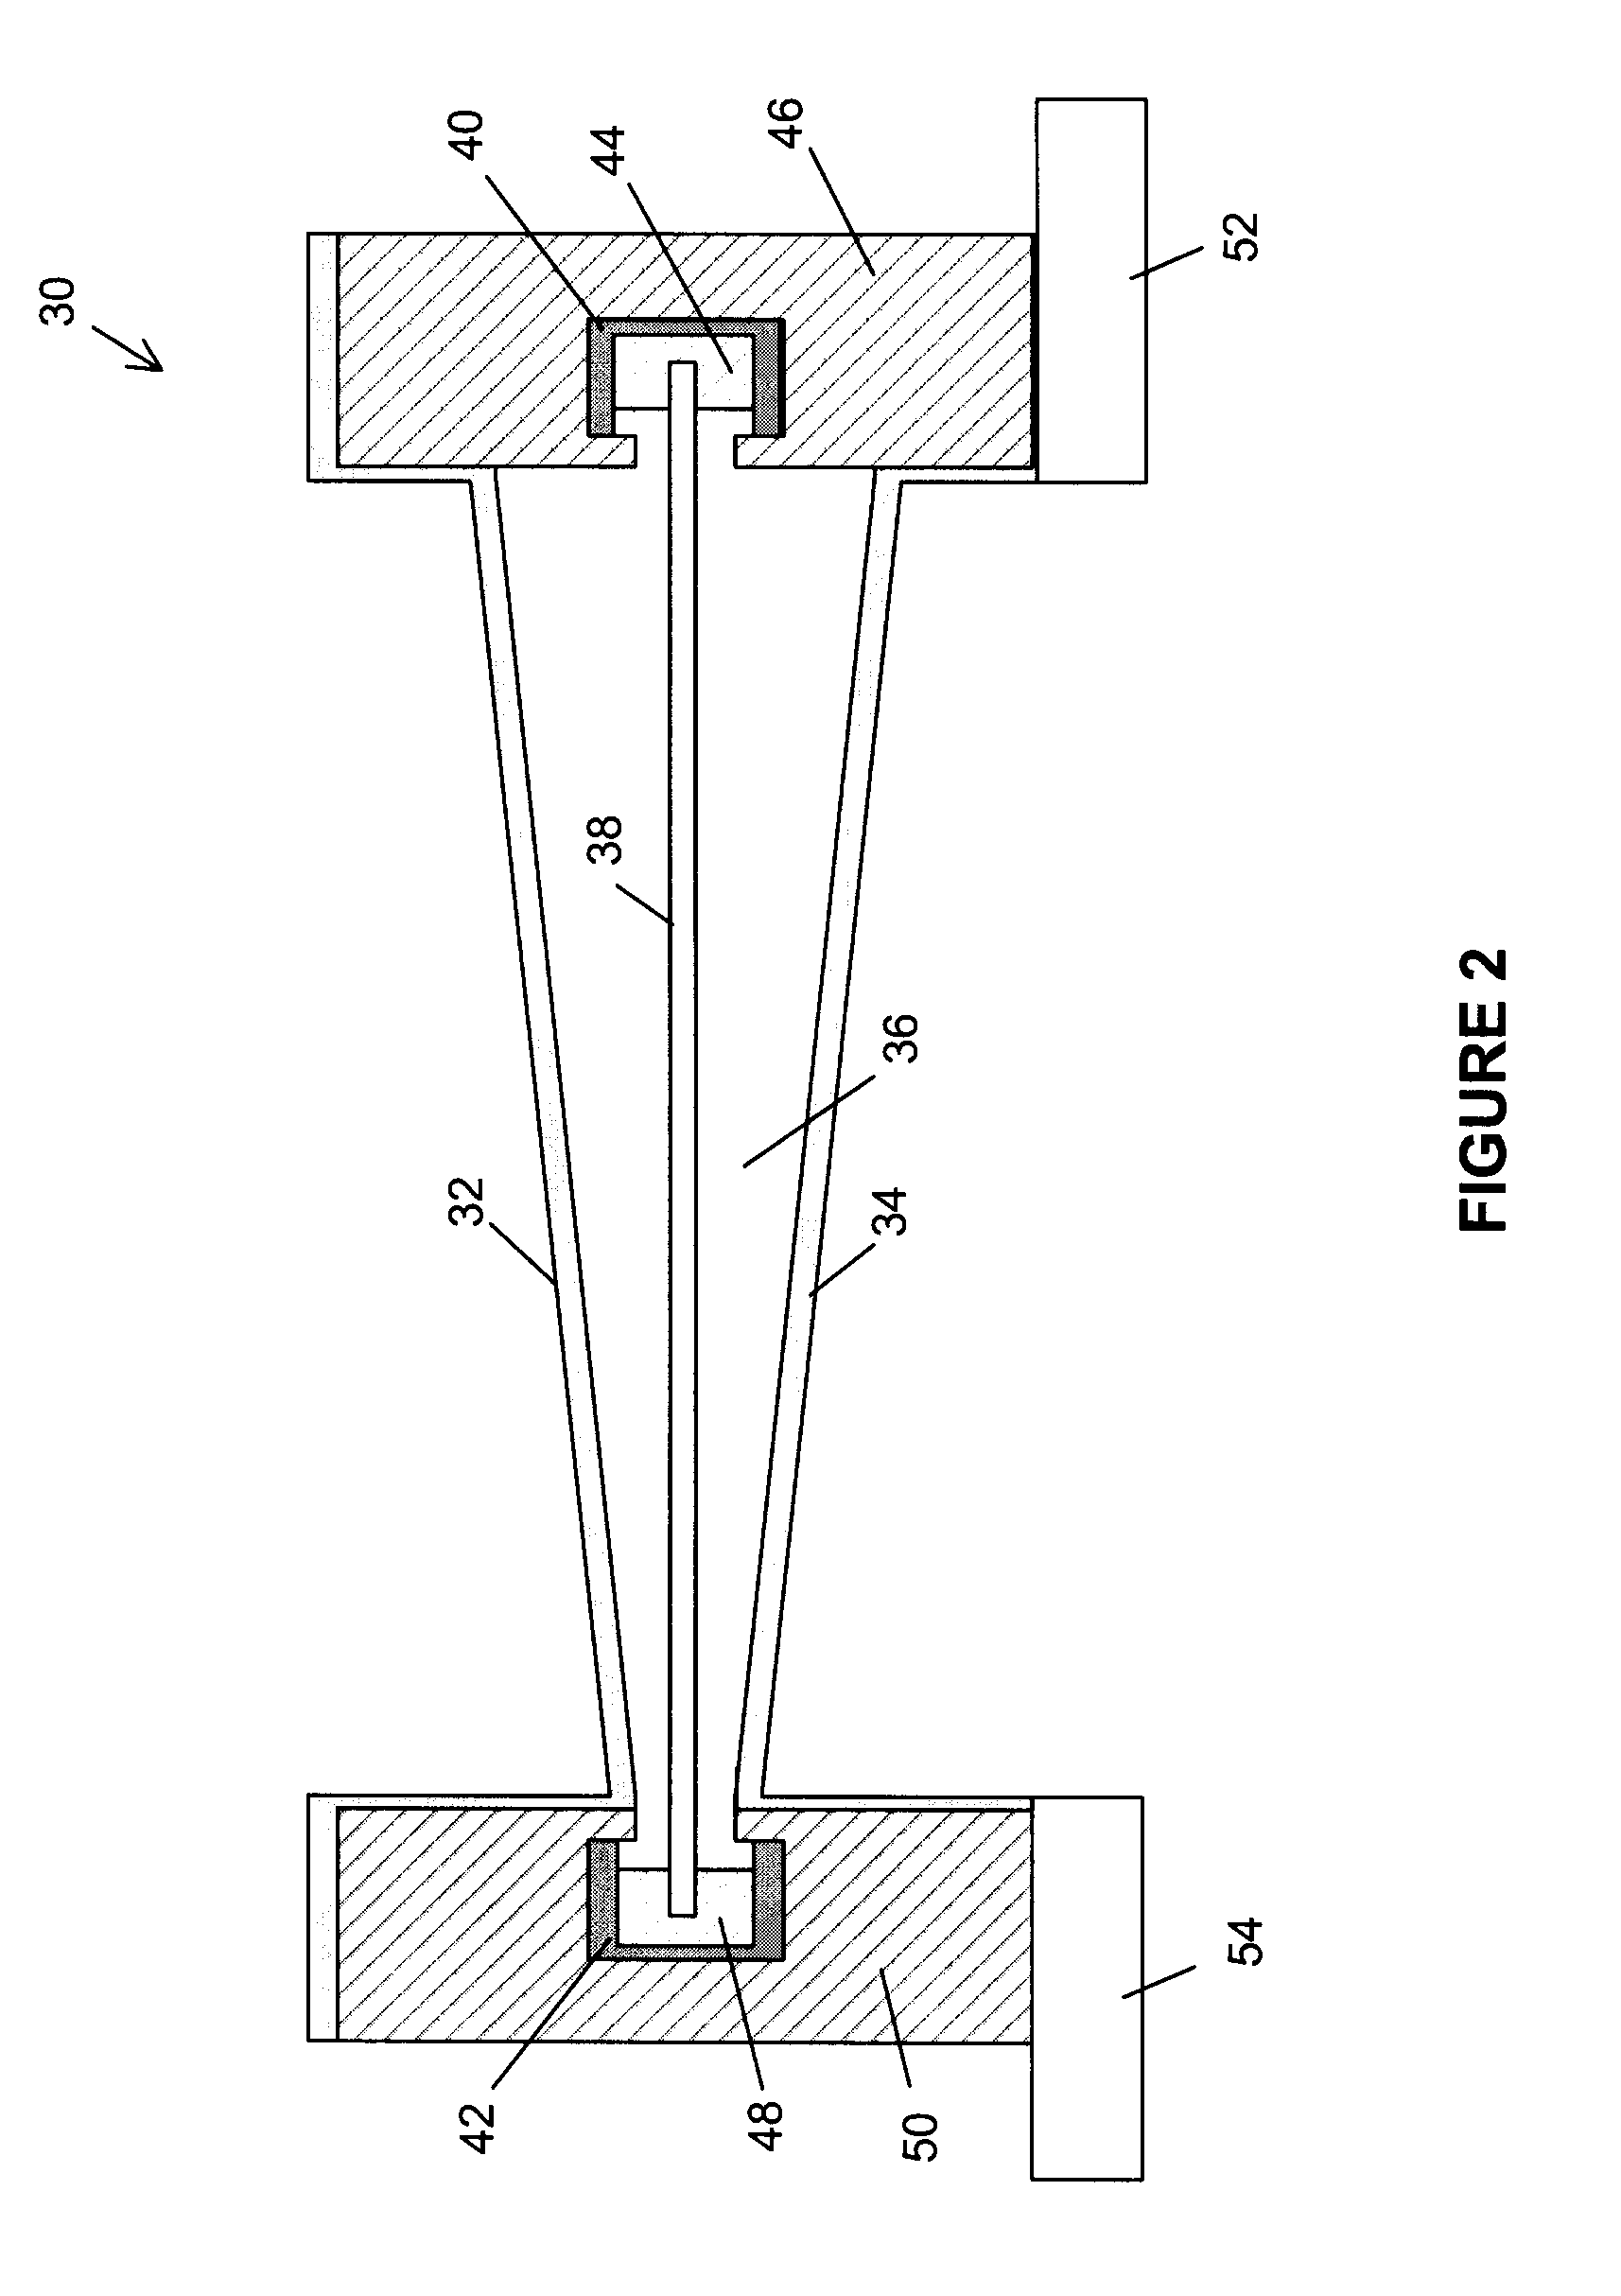 Apparatus and methods for real-time verification of radiation therapy